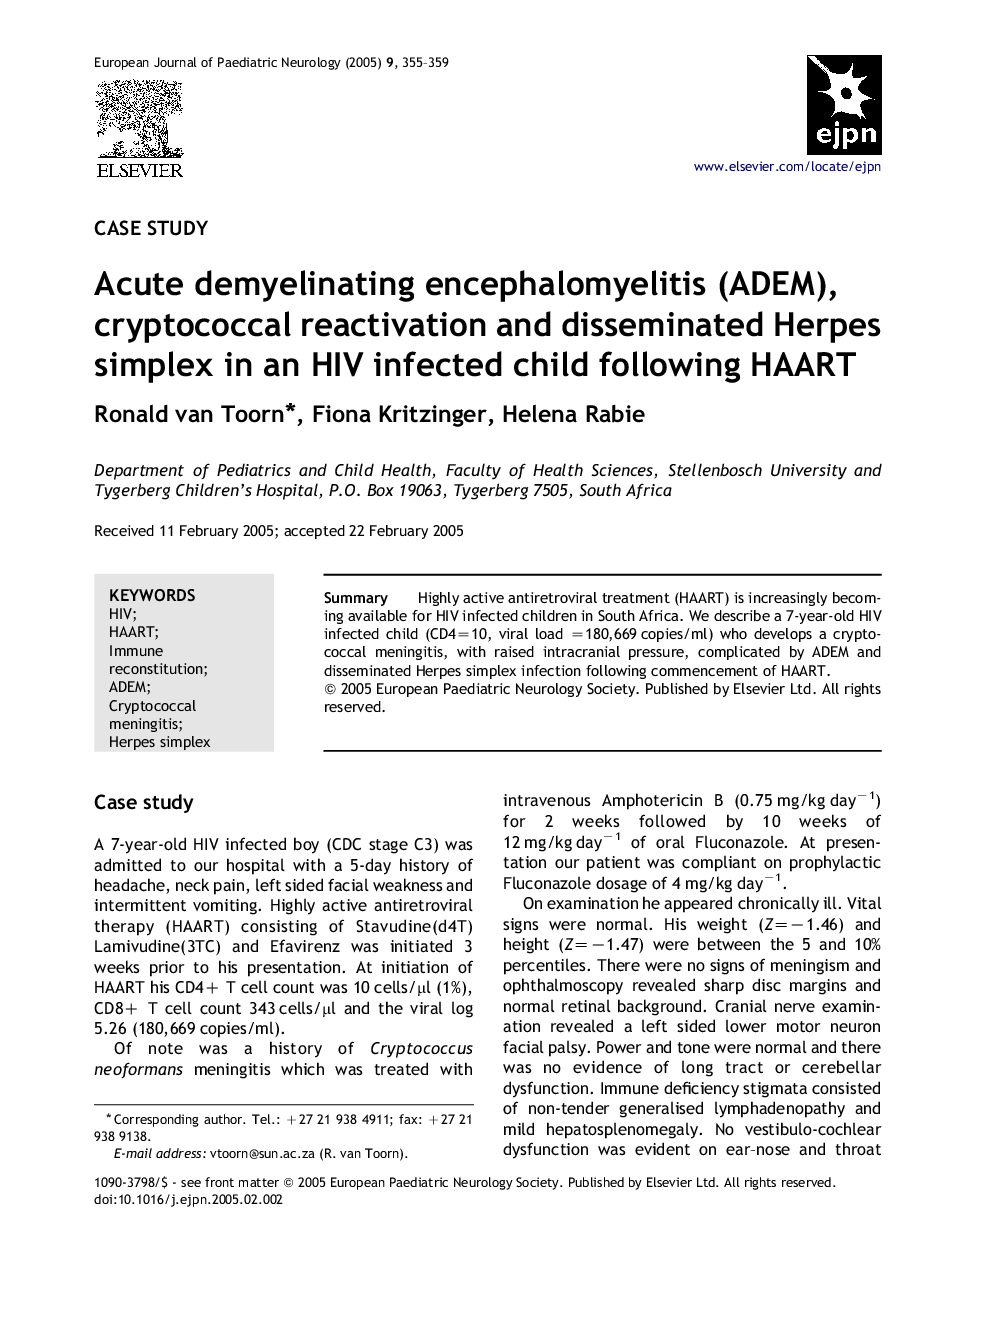 Acute demyelinating encephalomyelitis (ADEM), cryptococcal reactivation and disseminated Herpes simplex in an HIV infected child following HAART